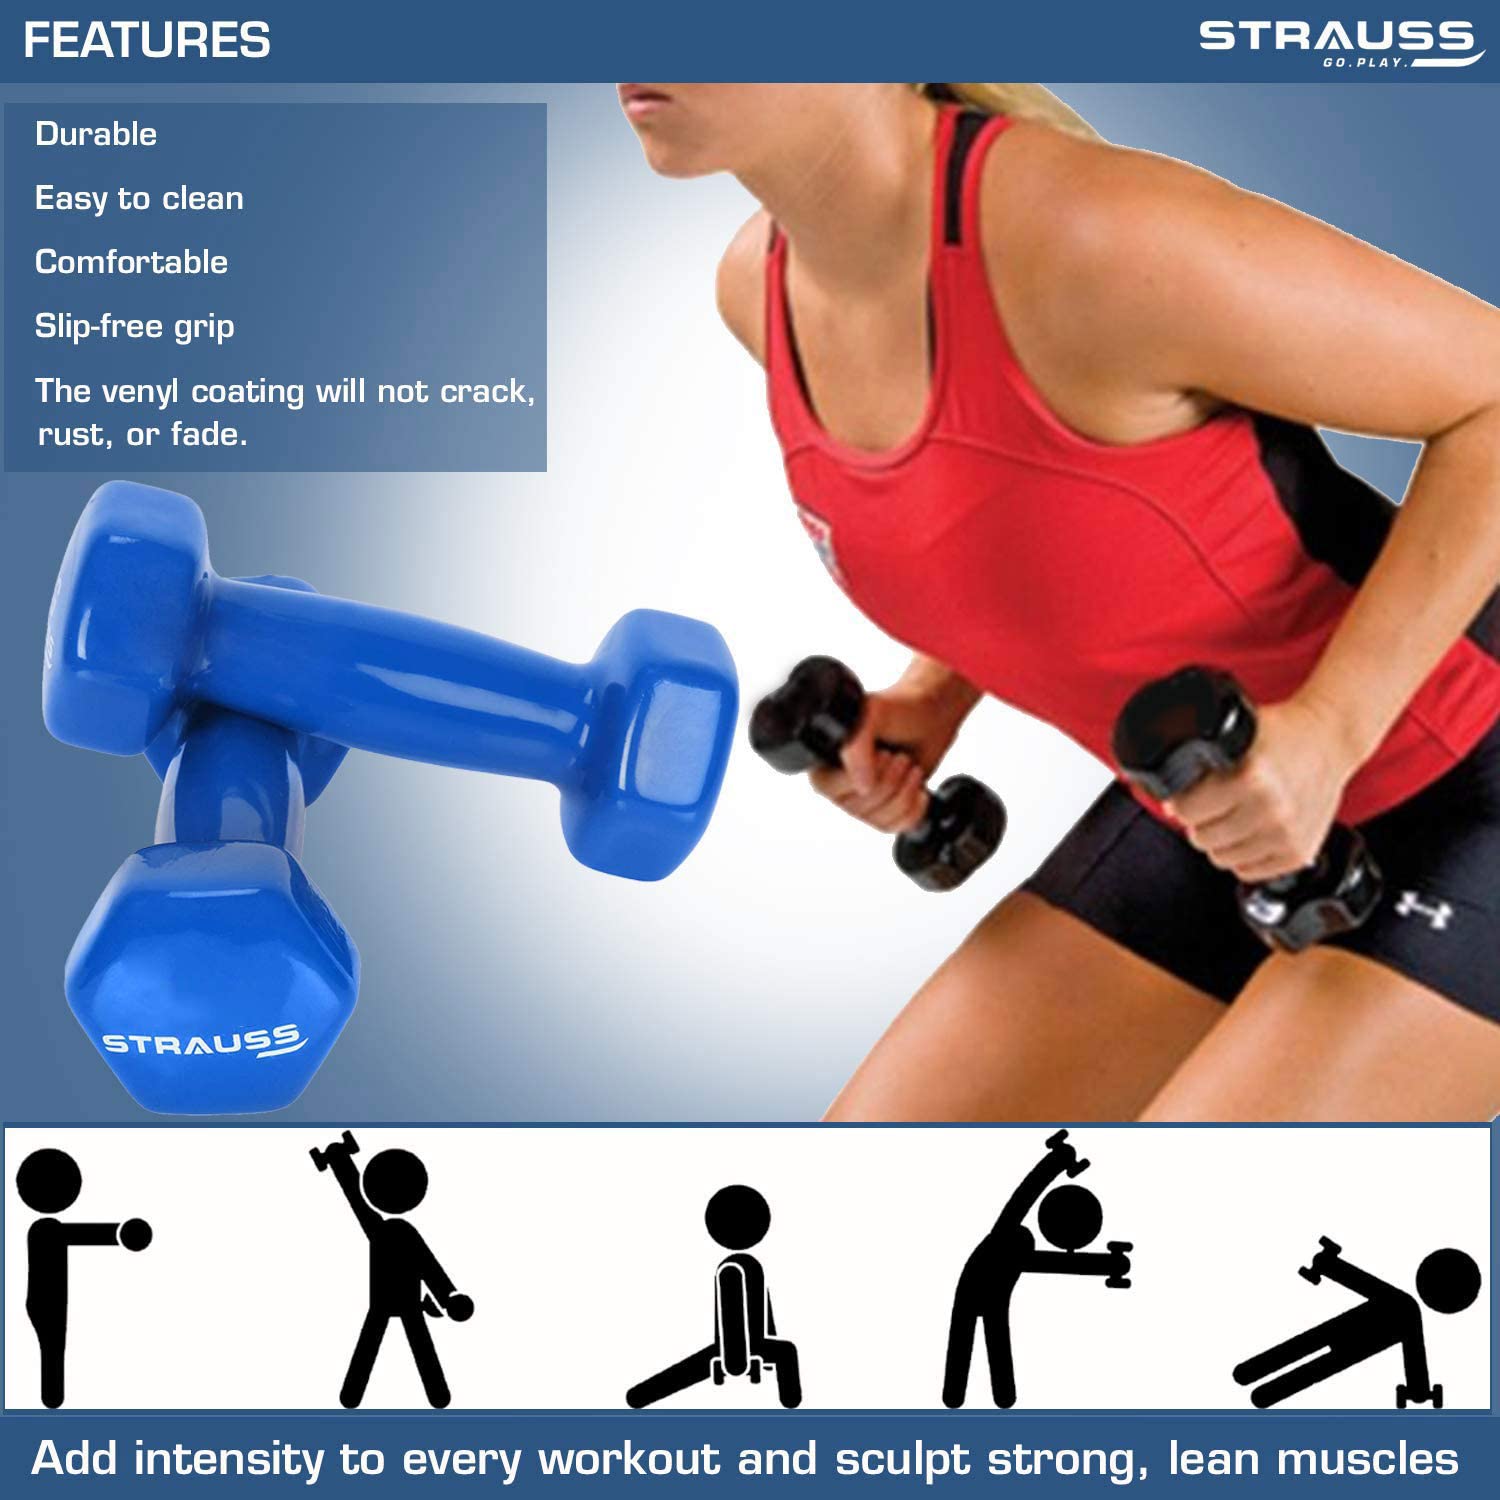 Strauss Unisex Vinyl Dumbbells Weight for Men & Women | 2Kg (Each)| 4Kg (Pair) | Ideal for Home Workout and Gym Exercises (Blue)